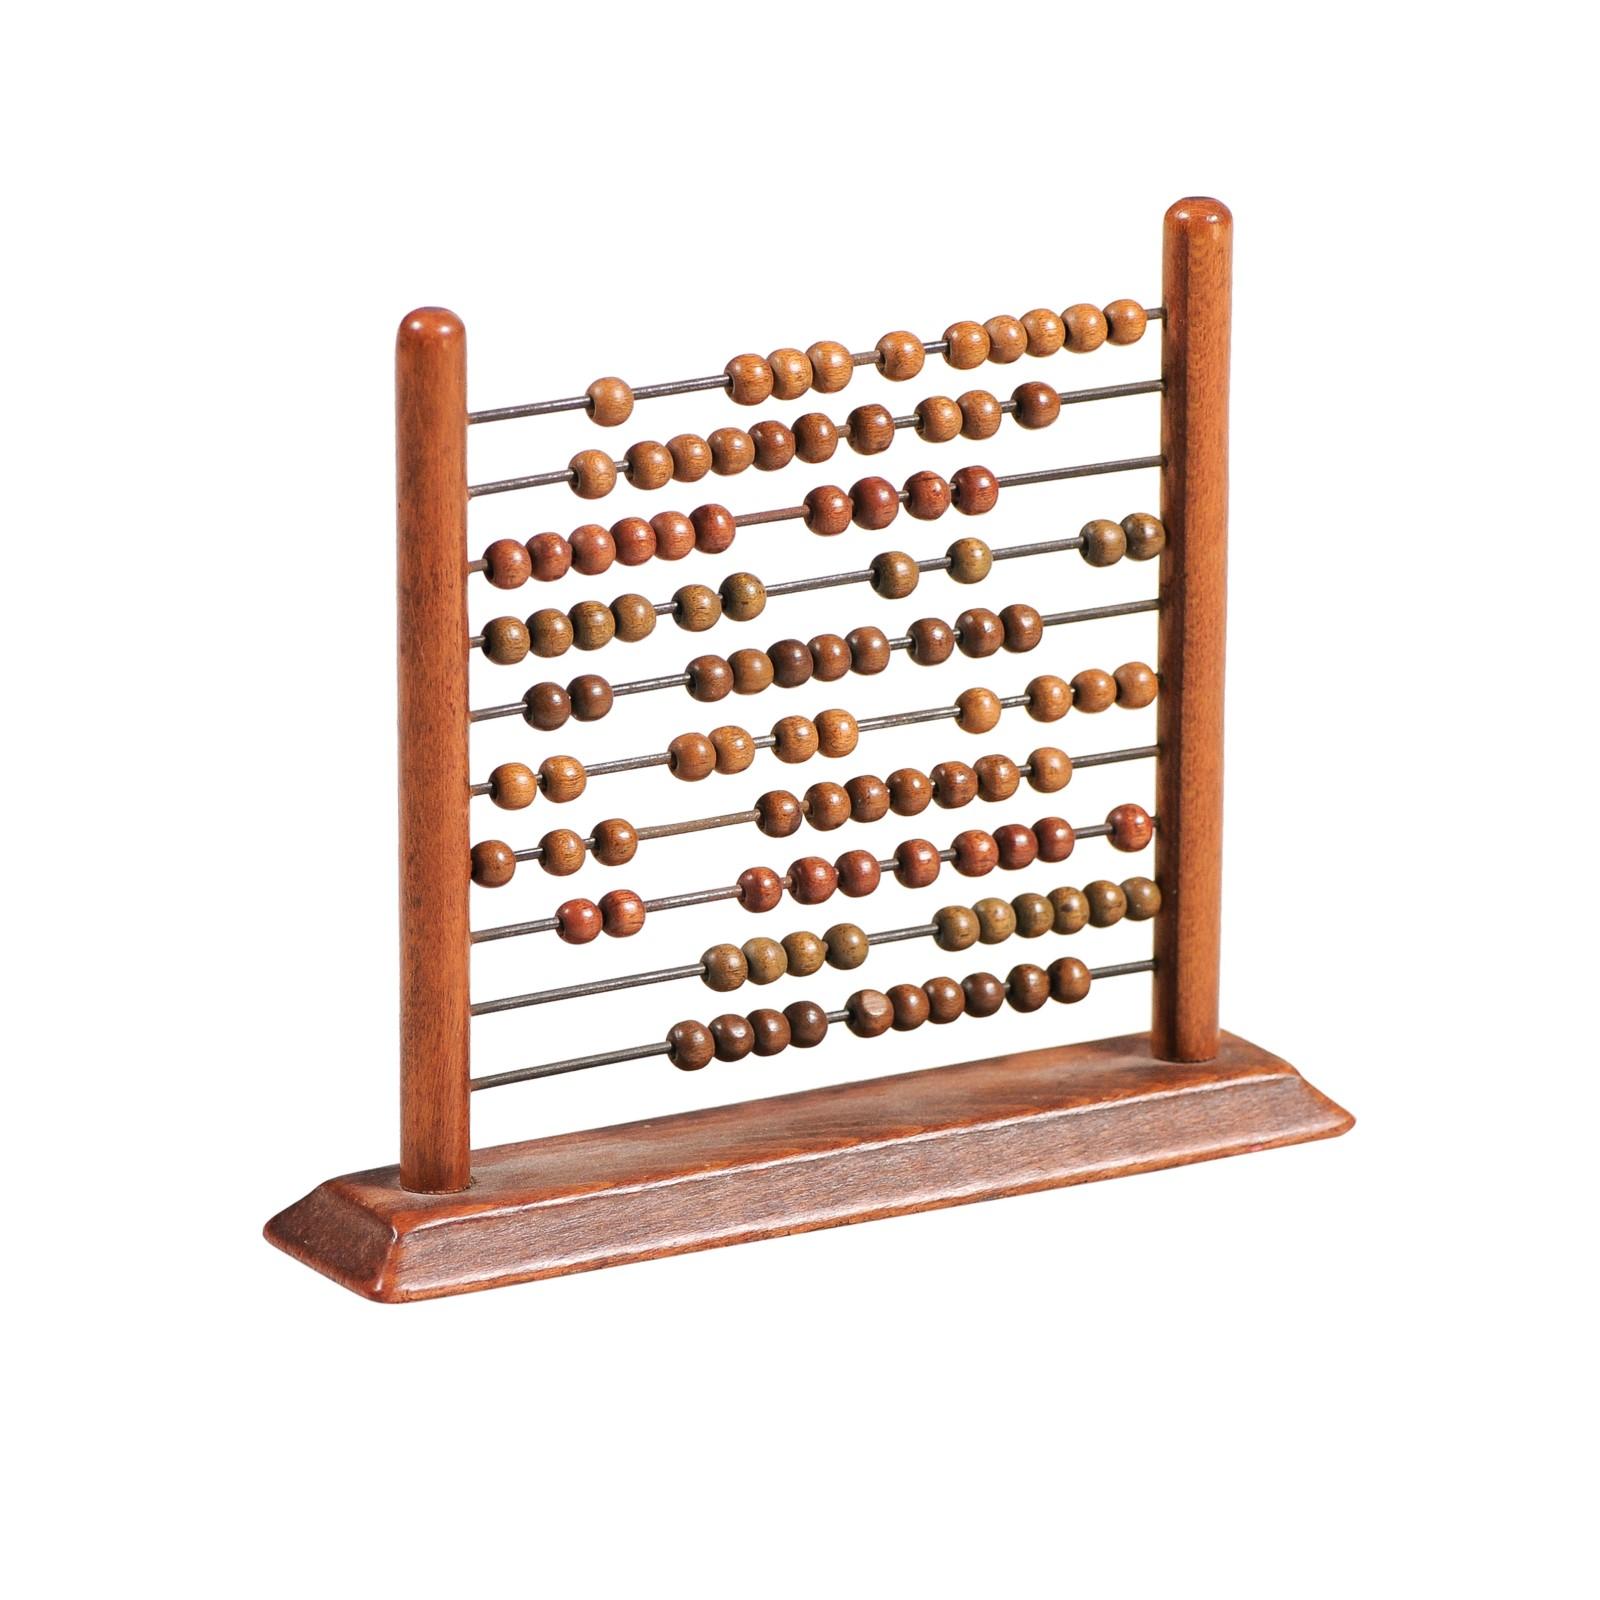 An English Victorian period abacus from the 19th century, with wooden frame, iron rods and wooden beads. Created in England during Queen Victoria's reign, this wooden abacus is an example of one of the most well-known and least understood tools for